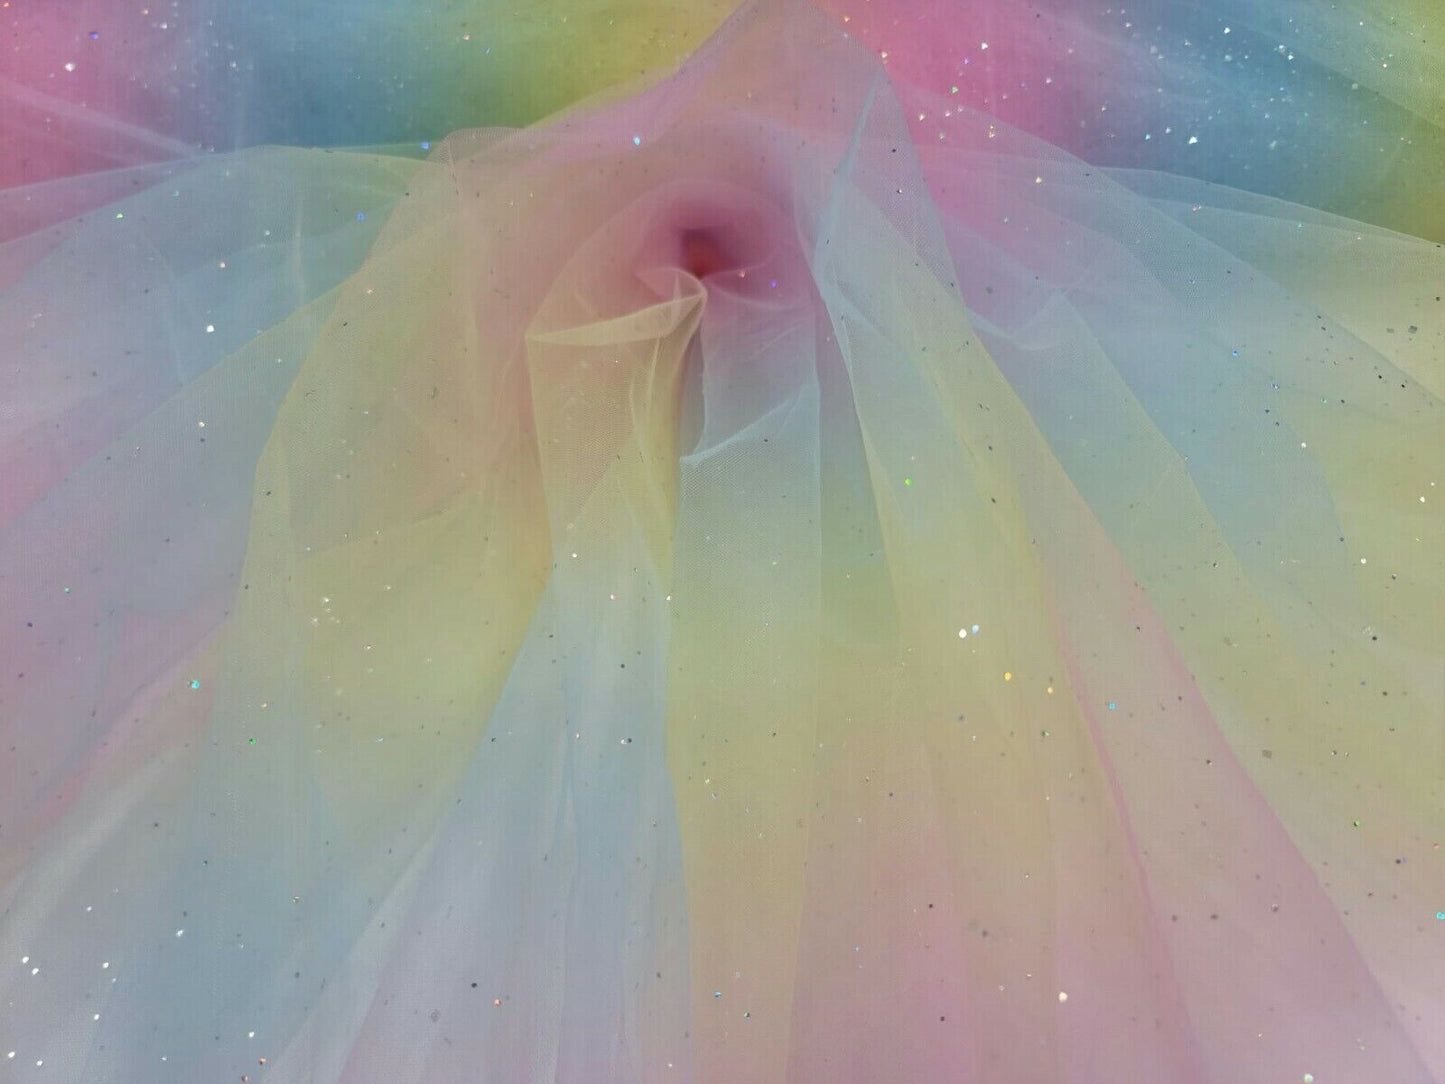 Rainbow Tulle 2-Way Stretch Fabric by the Yard - Ideal for Clothing, Tutus, and Sparkling Crafts - Glued Glitter Finish